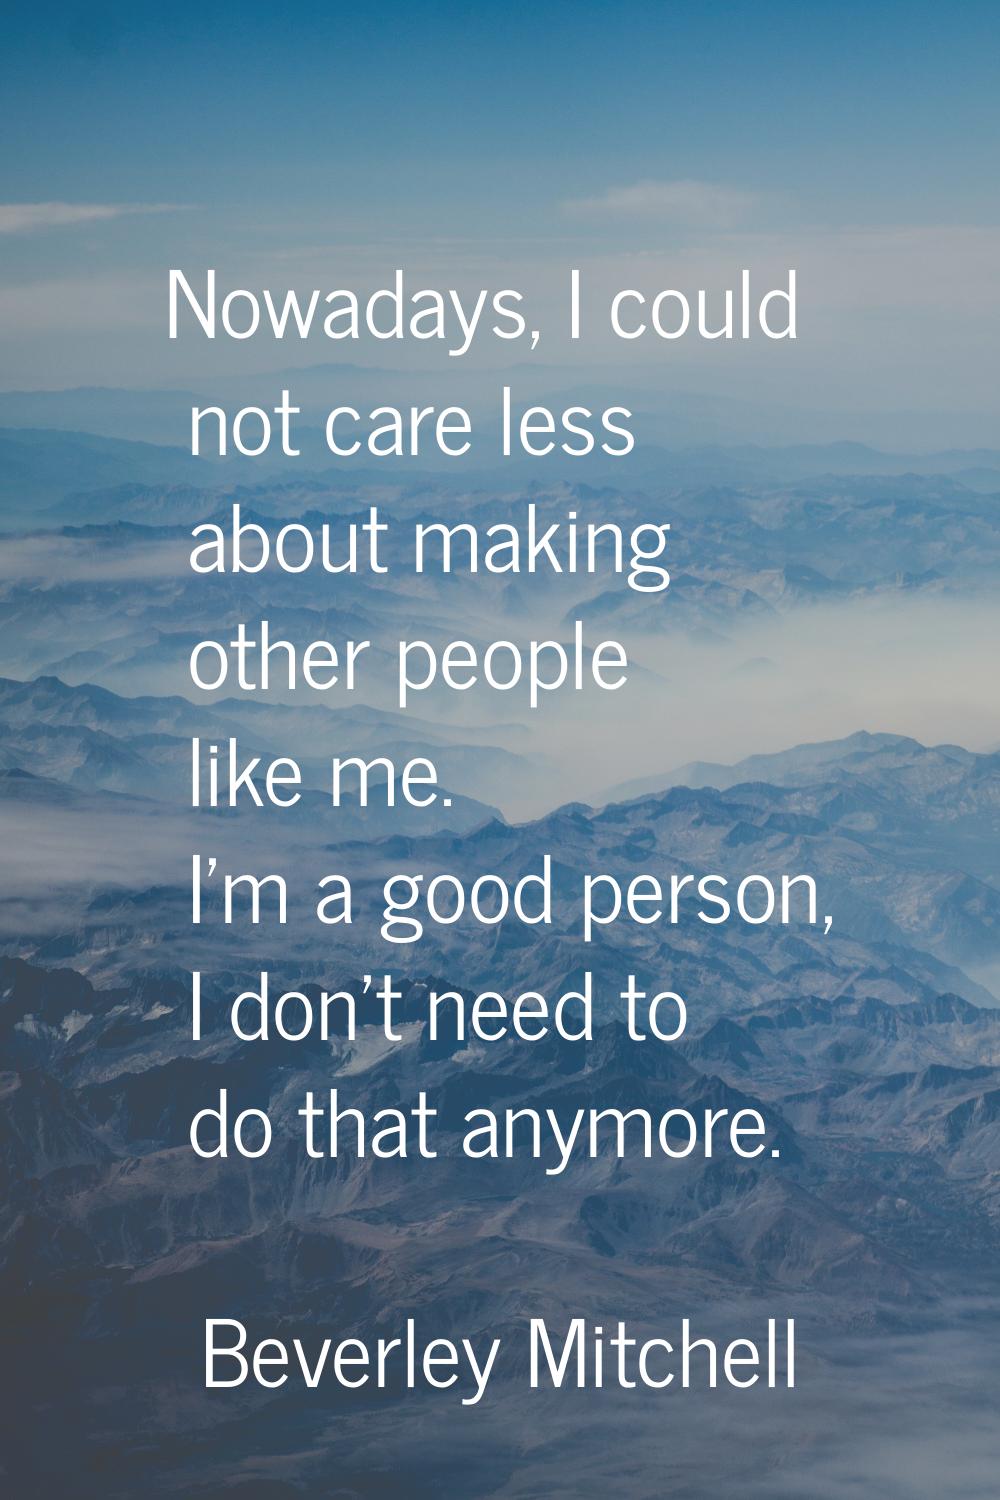 Nowadays, I could not care less about making other people like me. I'm a good person, I don't need 